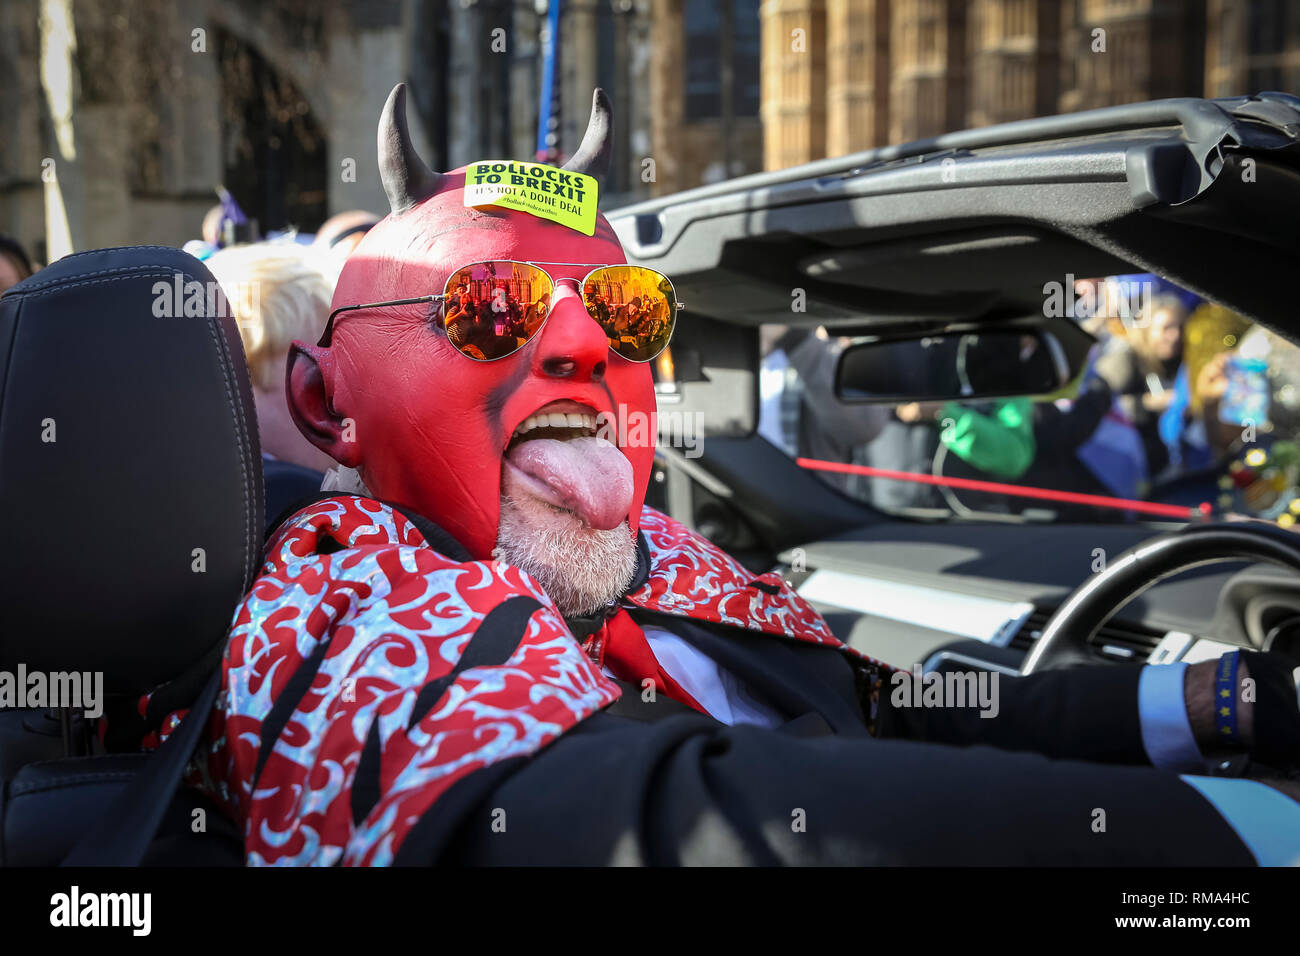 Westminster, London, UK. 14th Feb, 2019. The devil is on board and is in a fun mood. Remainers have organised a 'Fake Politicians' car, including Faux Bojo, Facob Rees-Mogg, a Fake Farage, a puppet of Theresa May, and a 'Devil'. They are joined by 'EU Supergirl' Madeleina Kay (left) Pro- and anti-Brexit protesters rally, wave flags and hold placards outside the Houses of Parliament and near the College Green media platforms in Westminster. Many have turned up in costumes and colourful outfits to get their message across. Credit: Imageplotter News and Sports/Alamy Live News Stock Photo